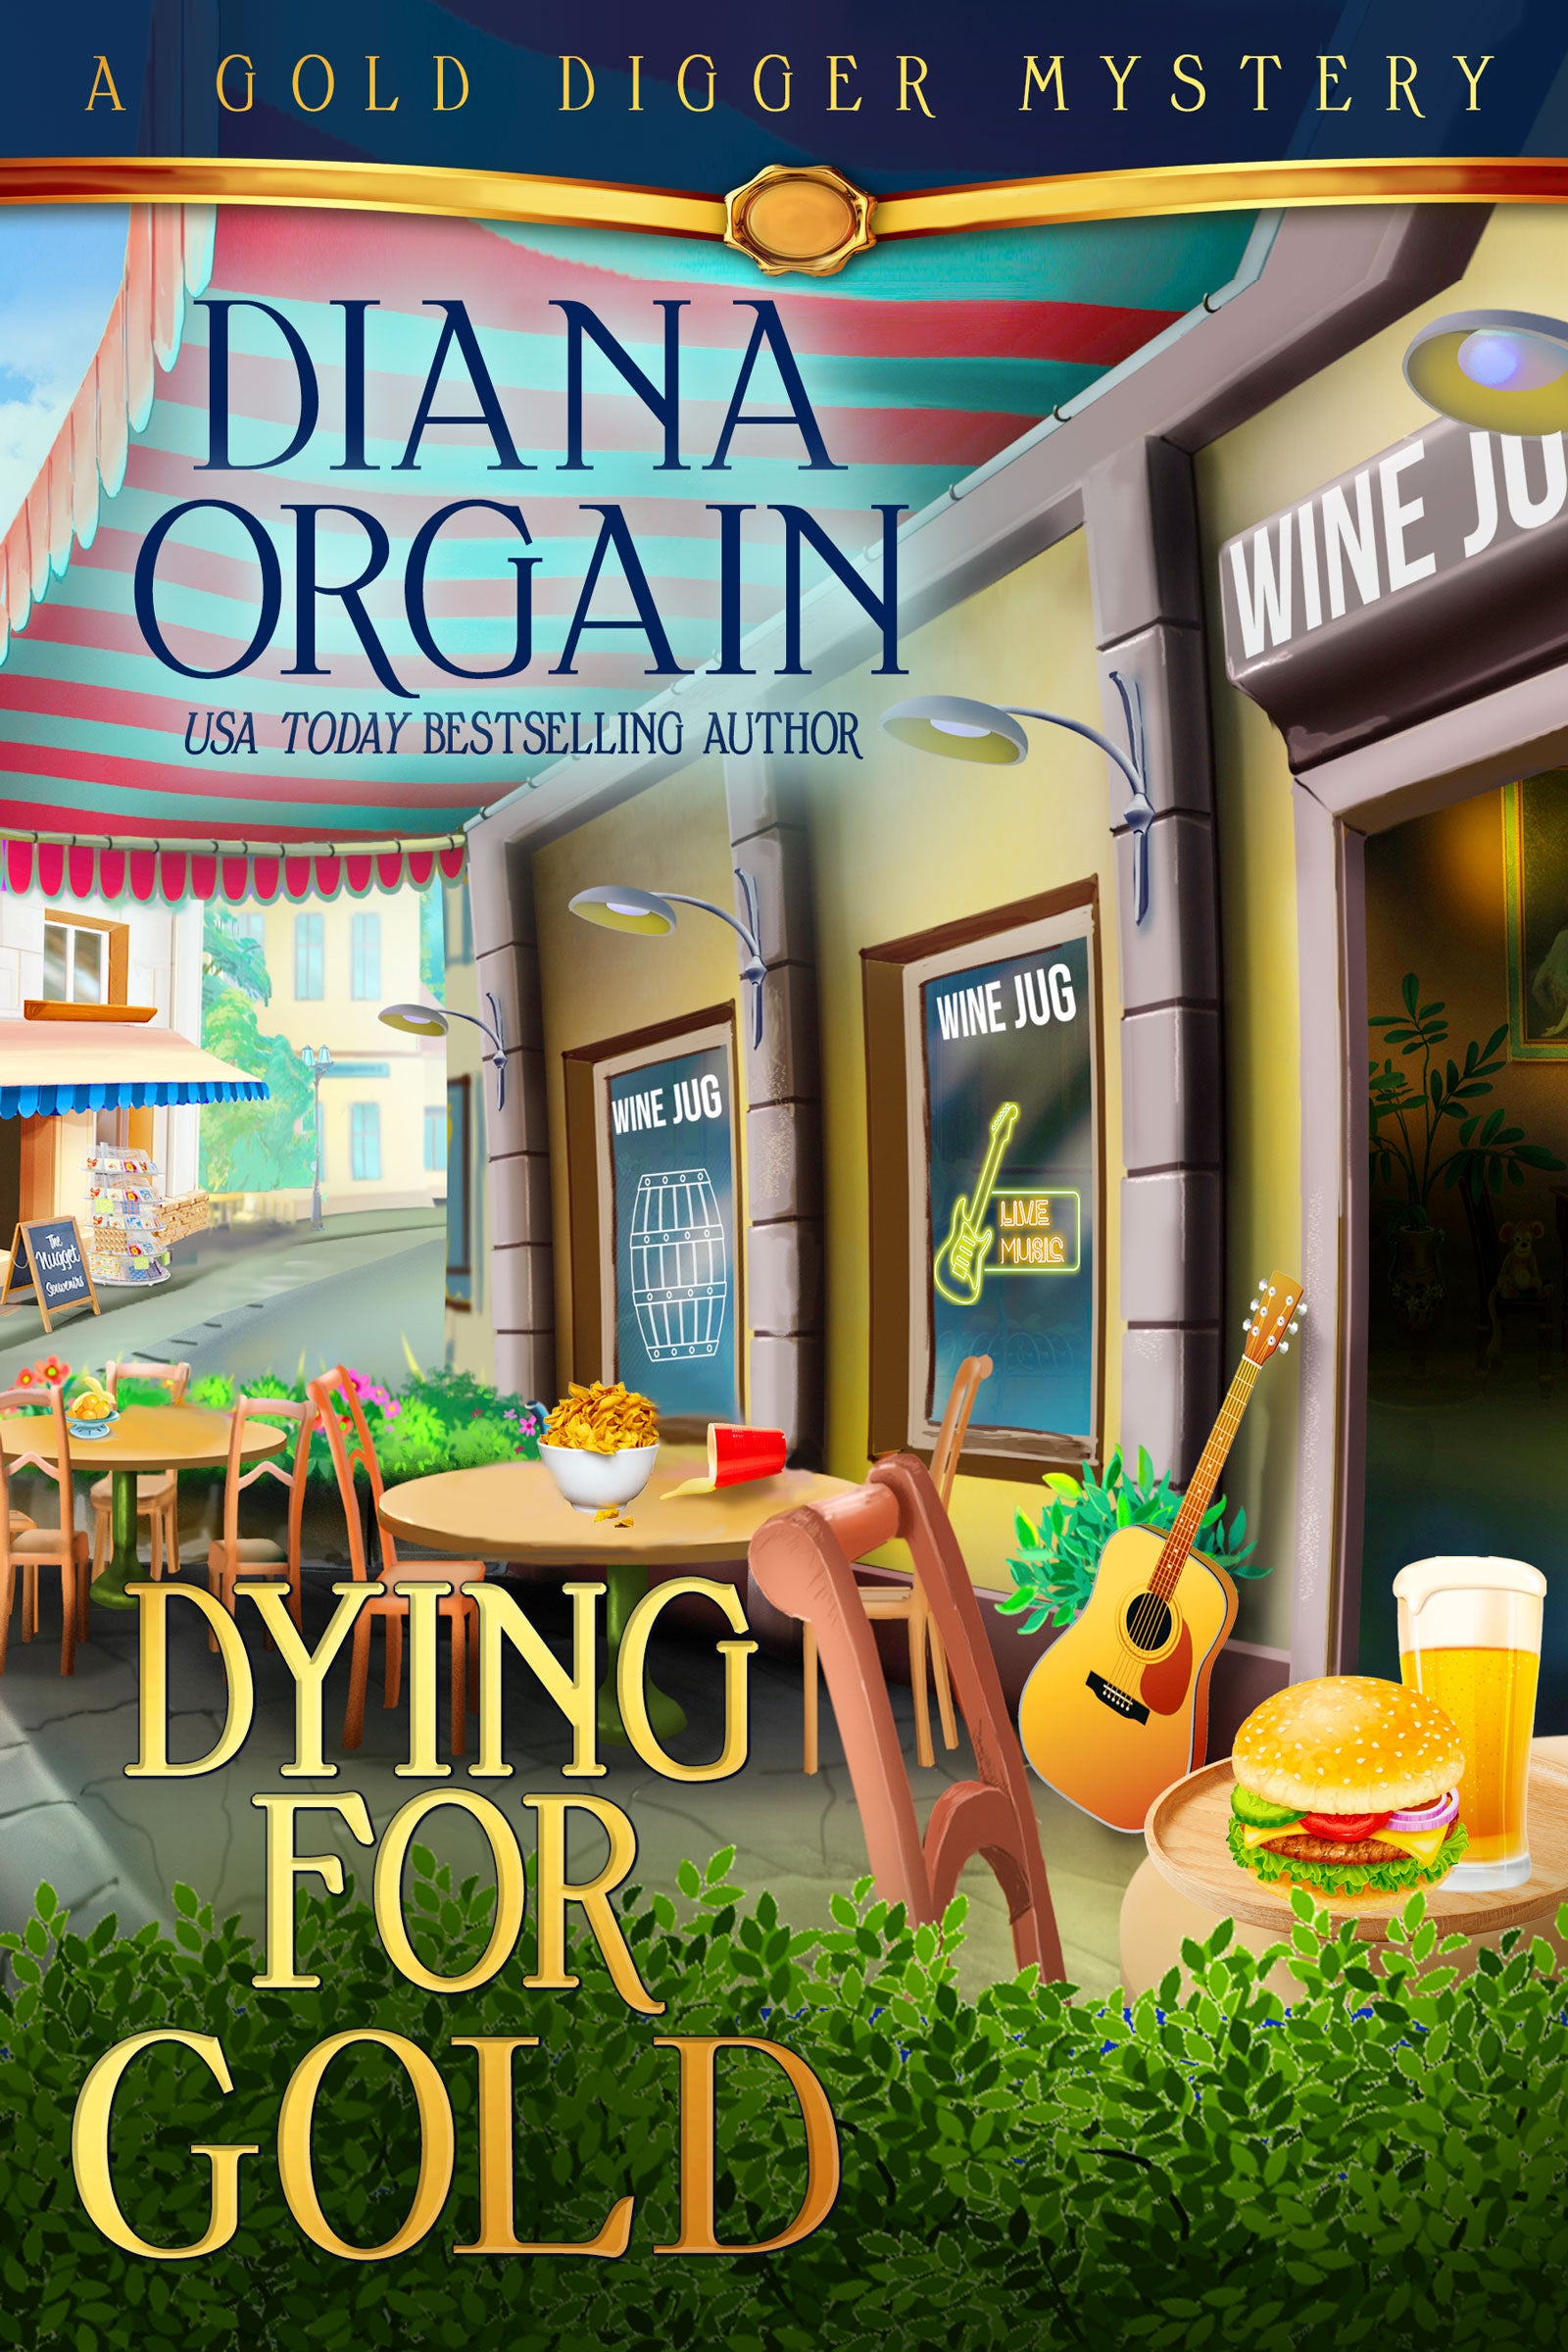 Dying for Gold E-BOOK (Book 1 in the Gold Digger Mystery Series) – Diana  Orgain